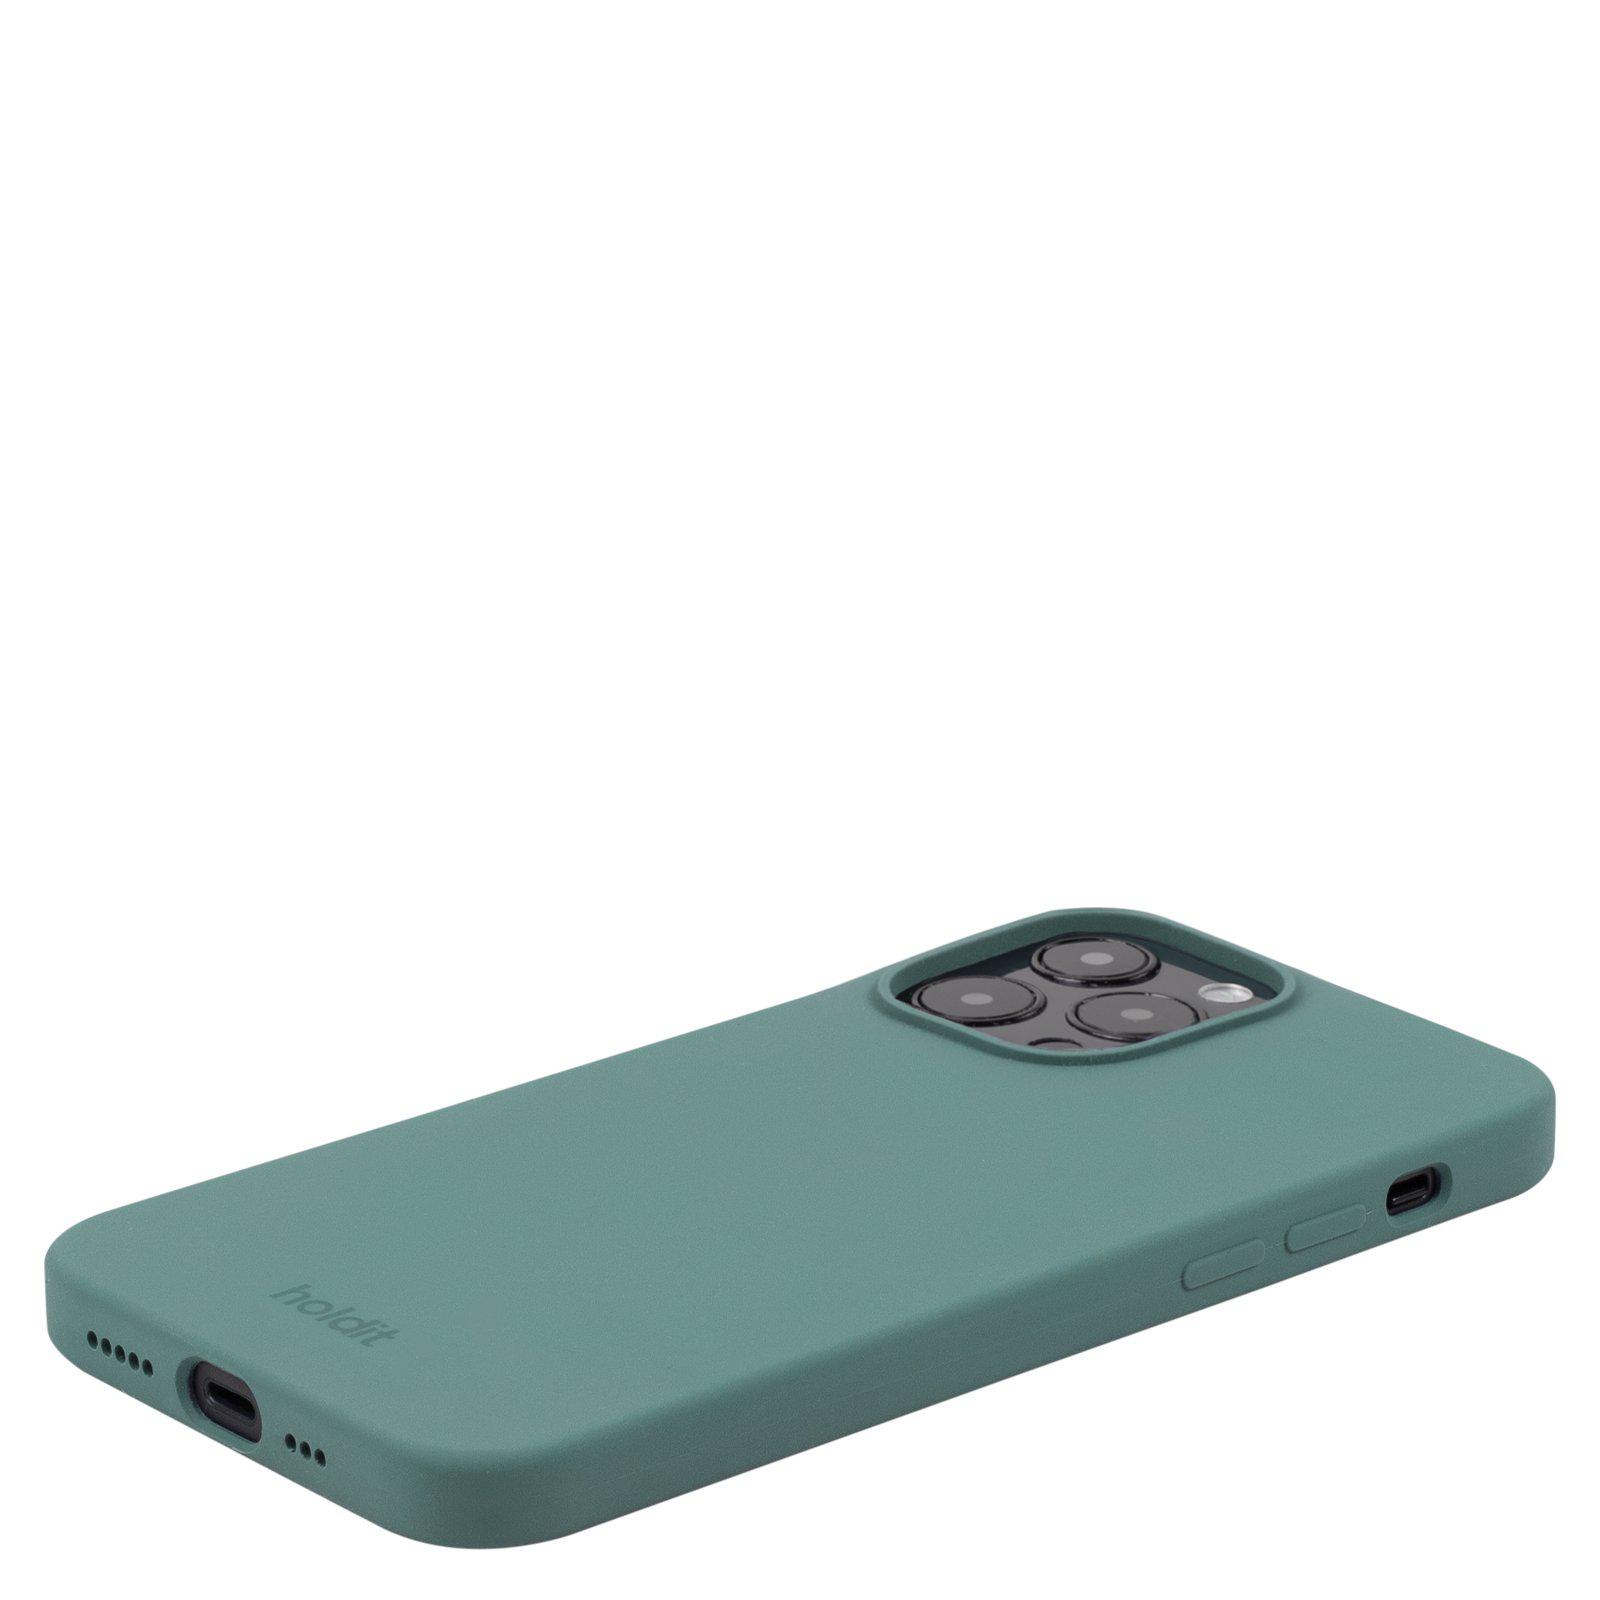 Гръб Holdit Silicone Case за iphone 15 Pro - Зелен